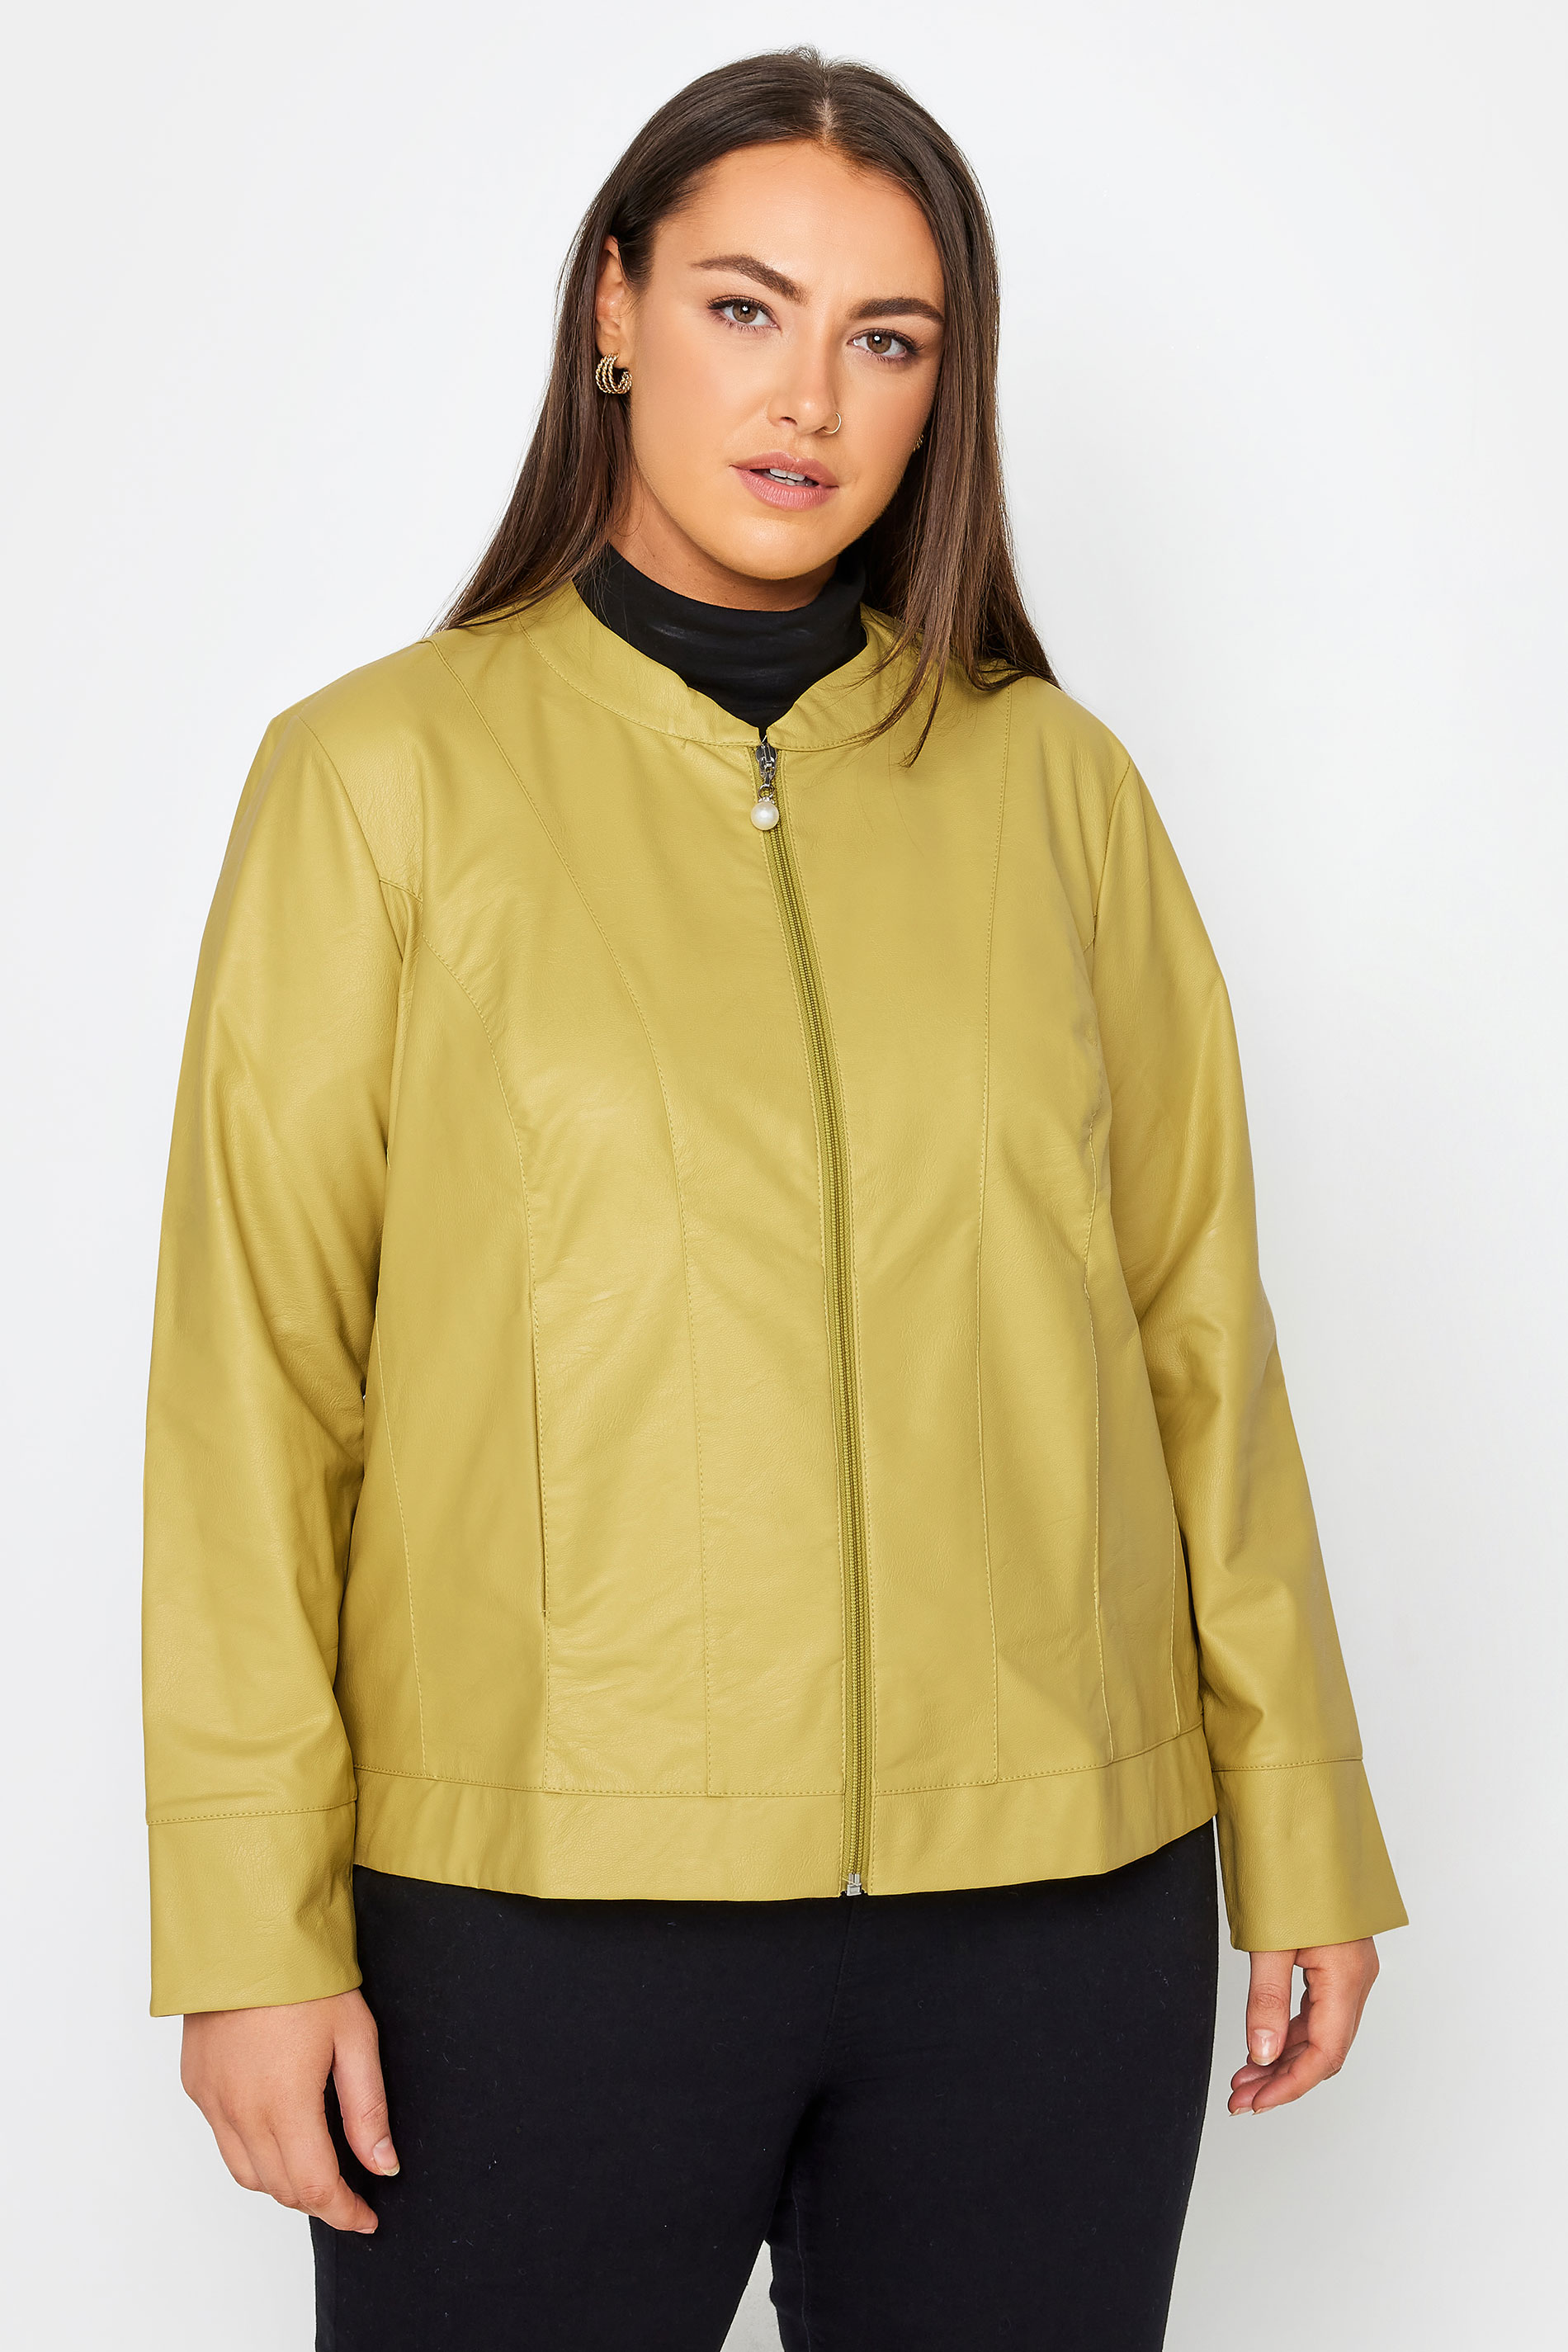 City Chic Mustard Yellow Faux Leather Collarless Jacket 1